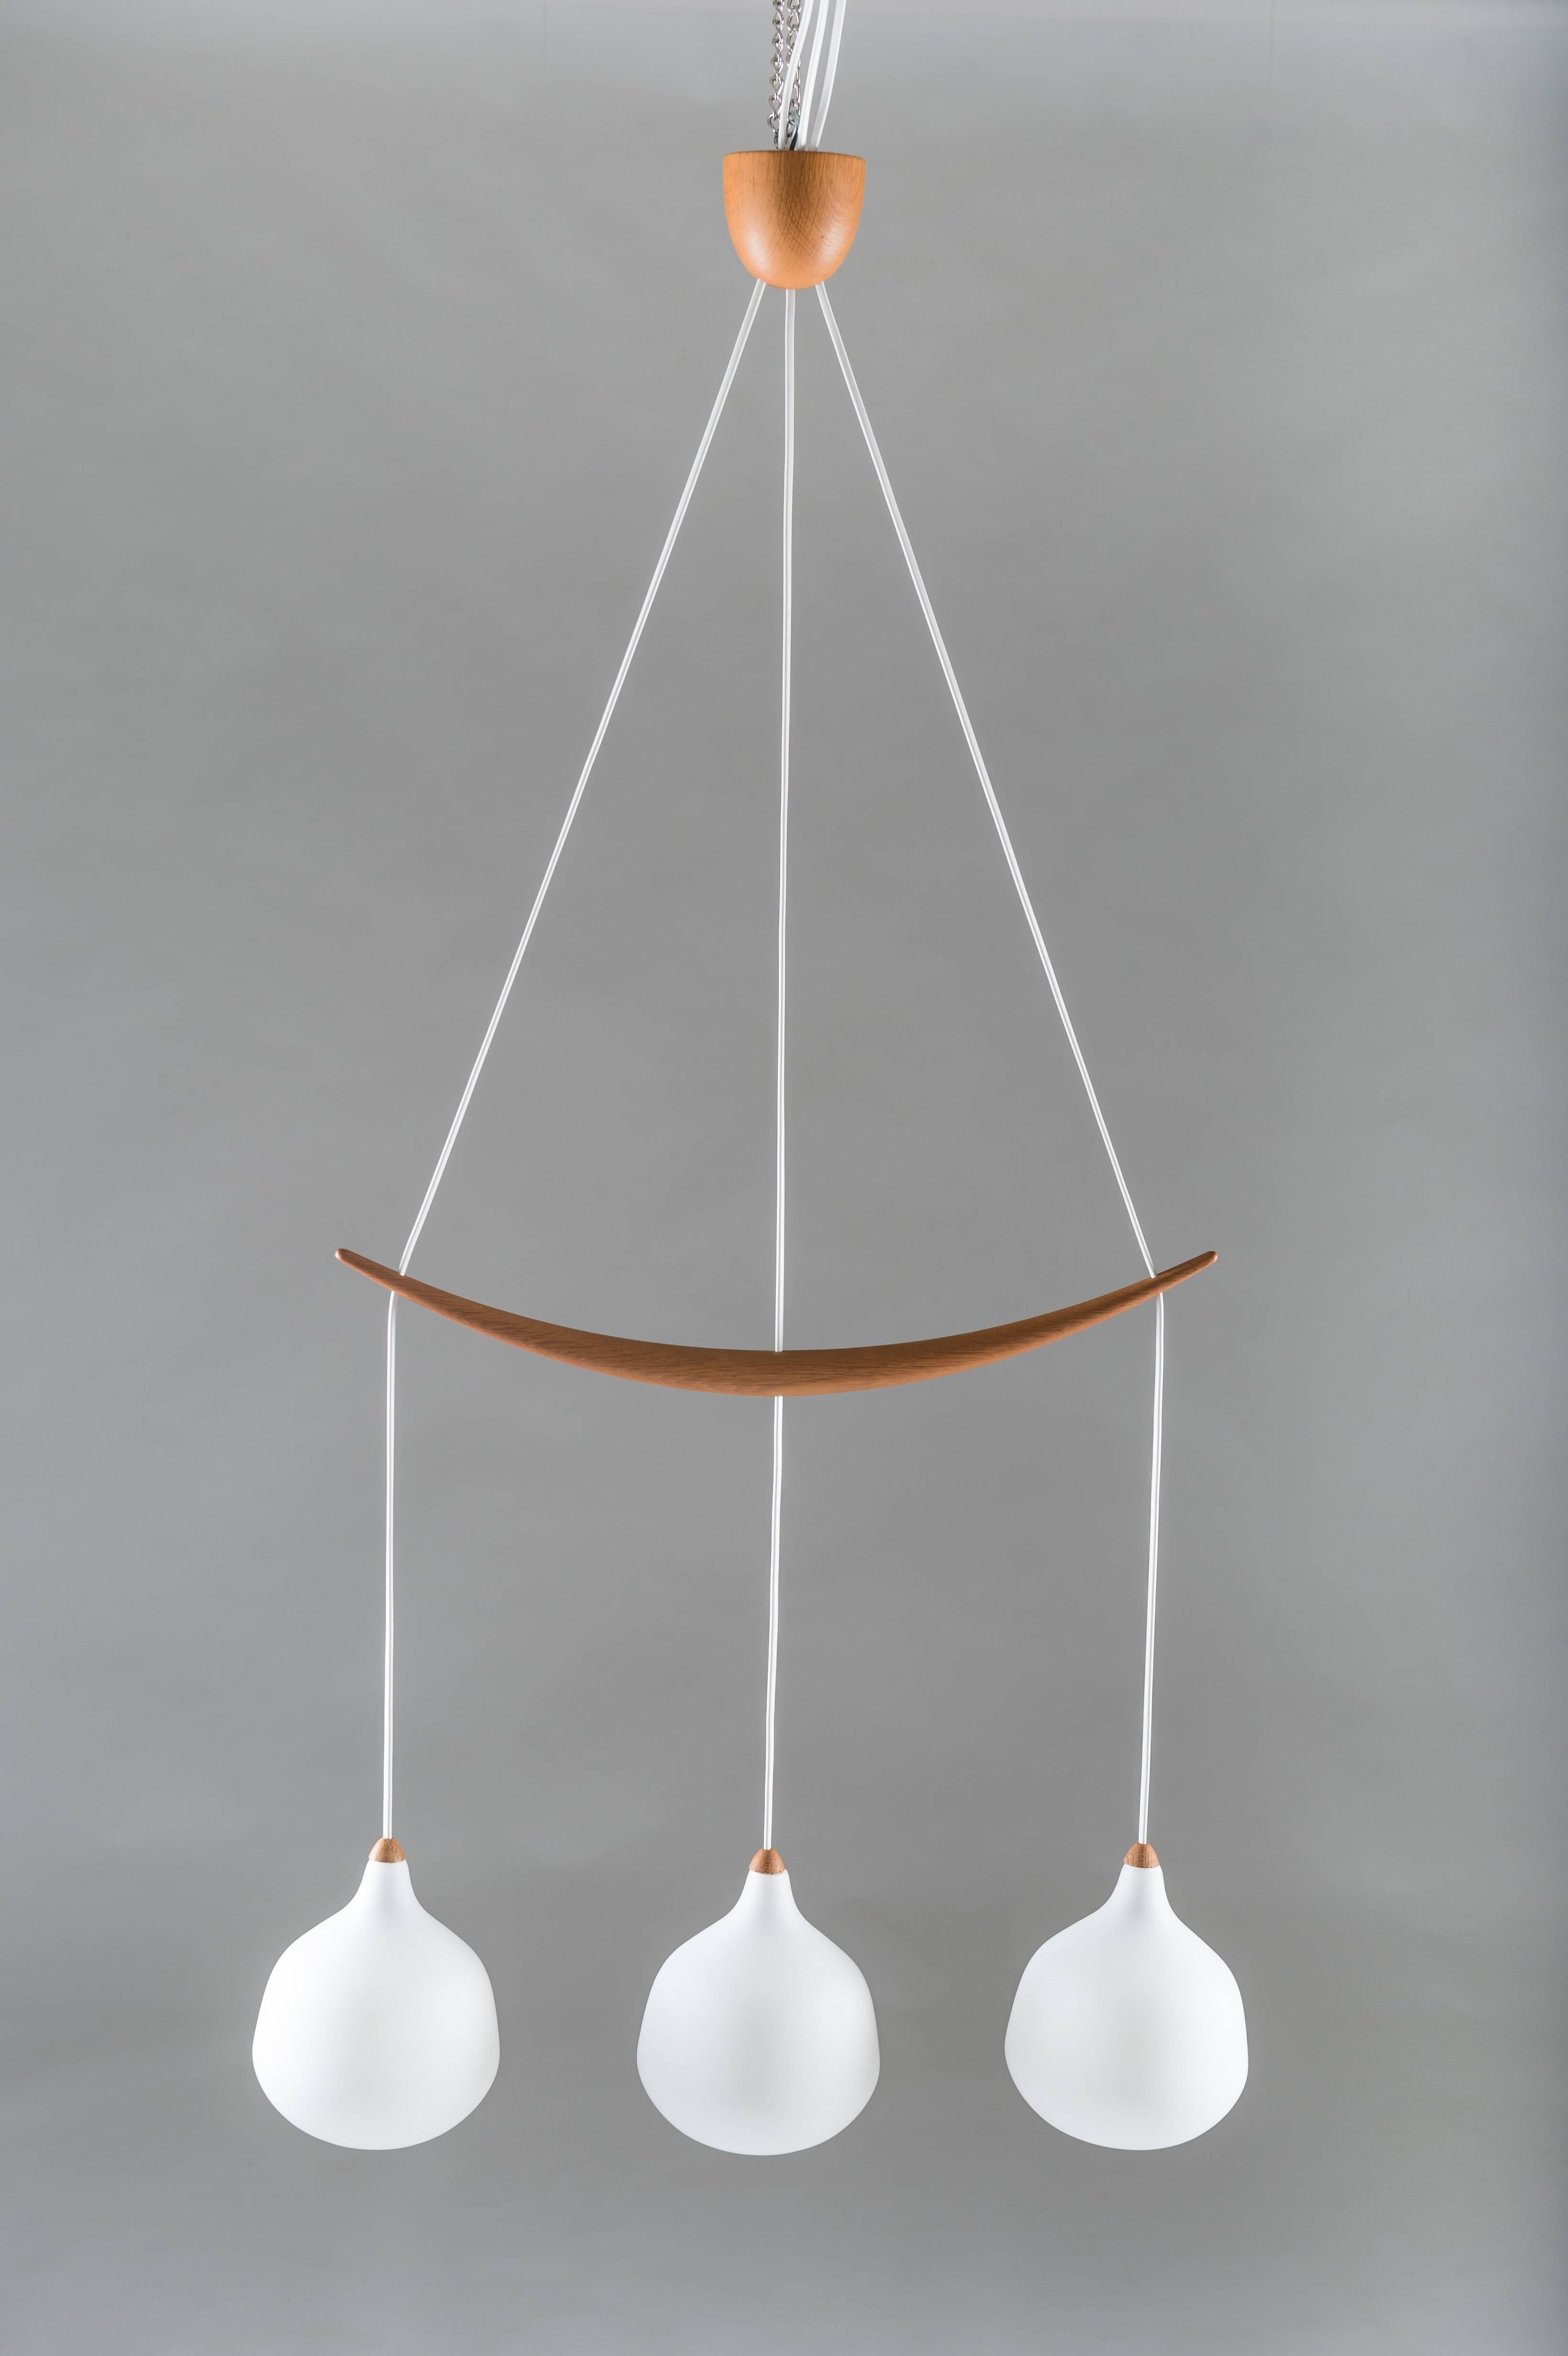 Pendant in oak and opaline glass by Uno and Östen Kristiansson for Luxus. The lamp features three hanging glass spheres, divided by a carefully carved oak stick. This lamp is in excellent vintage condition and has been rewired.
Free shipping in